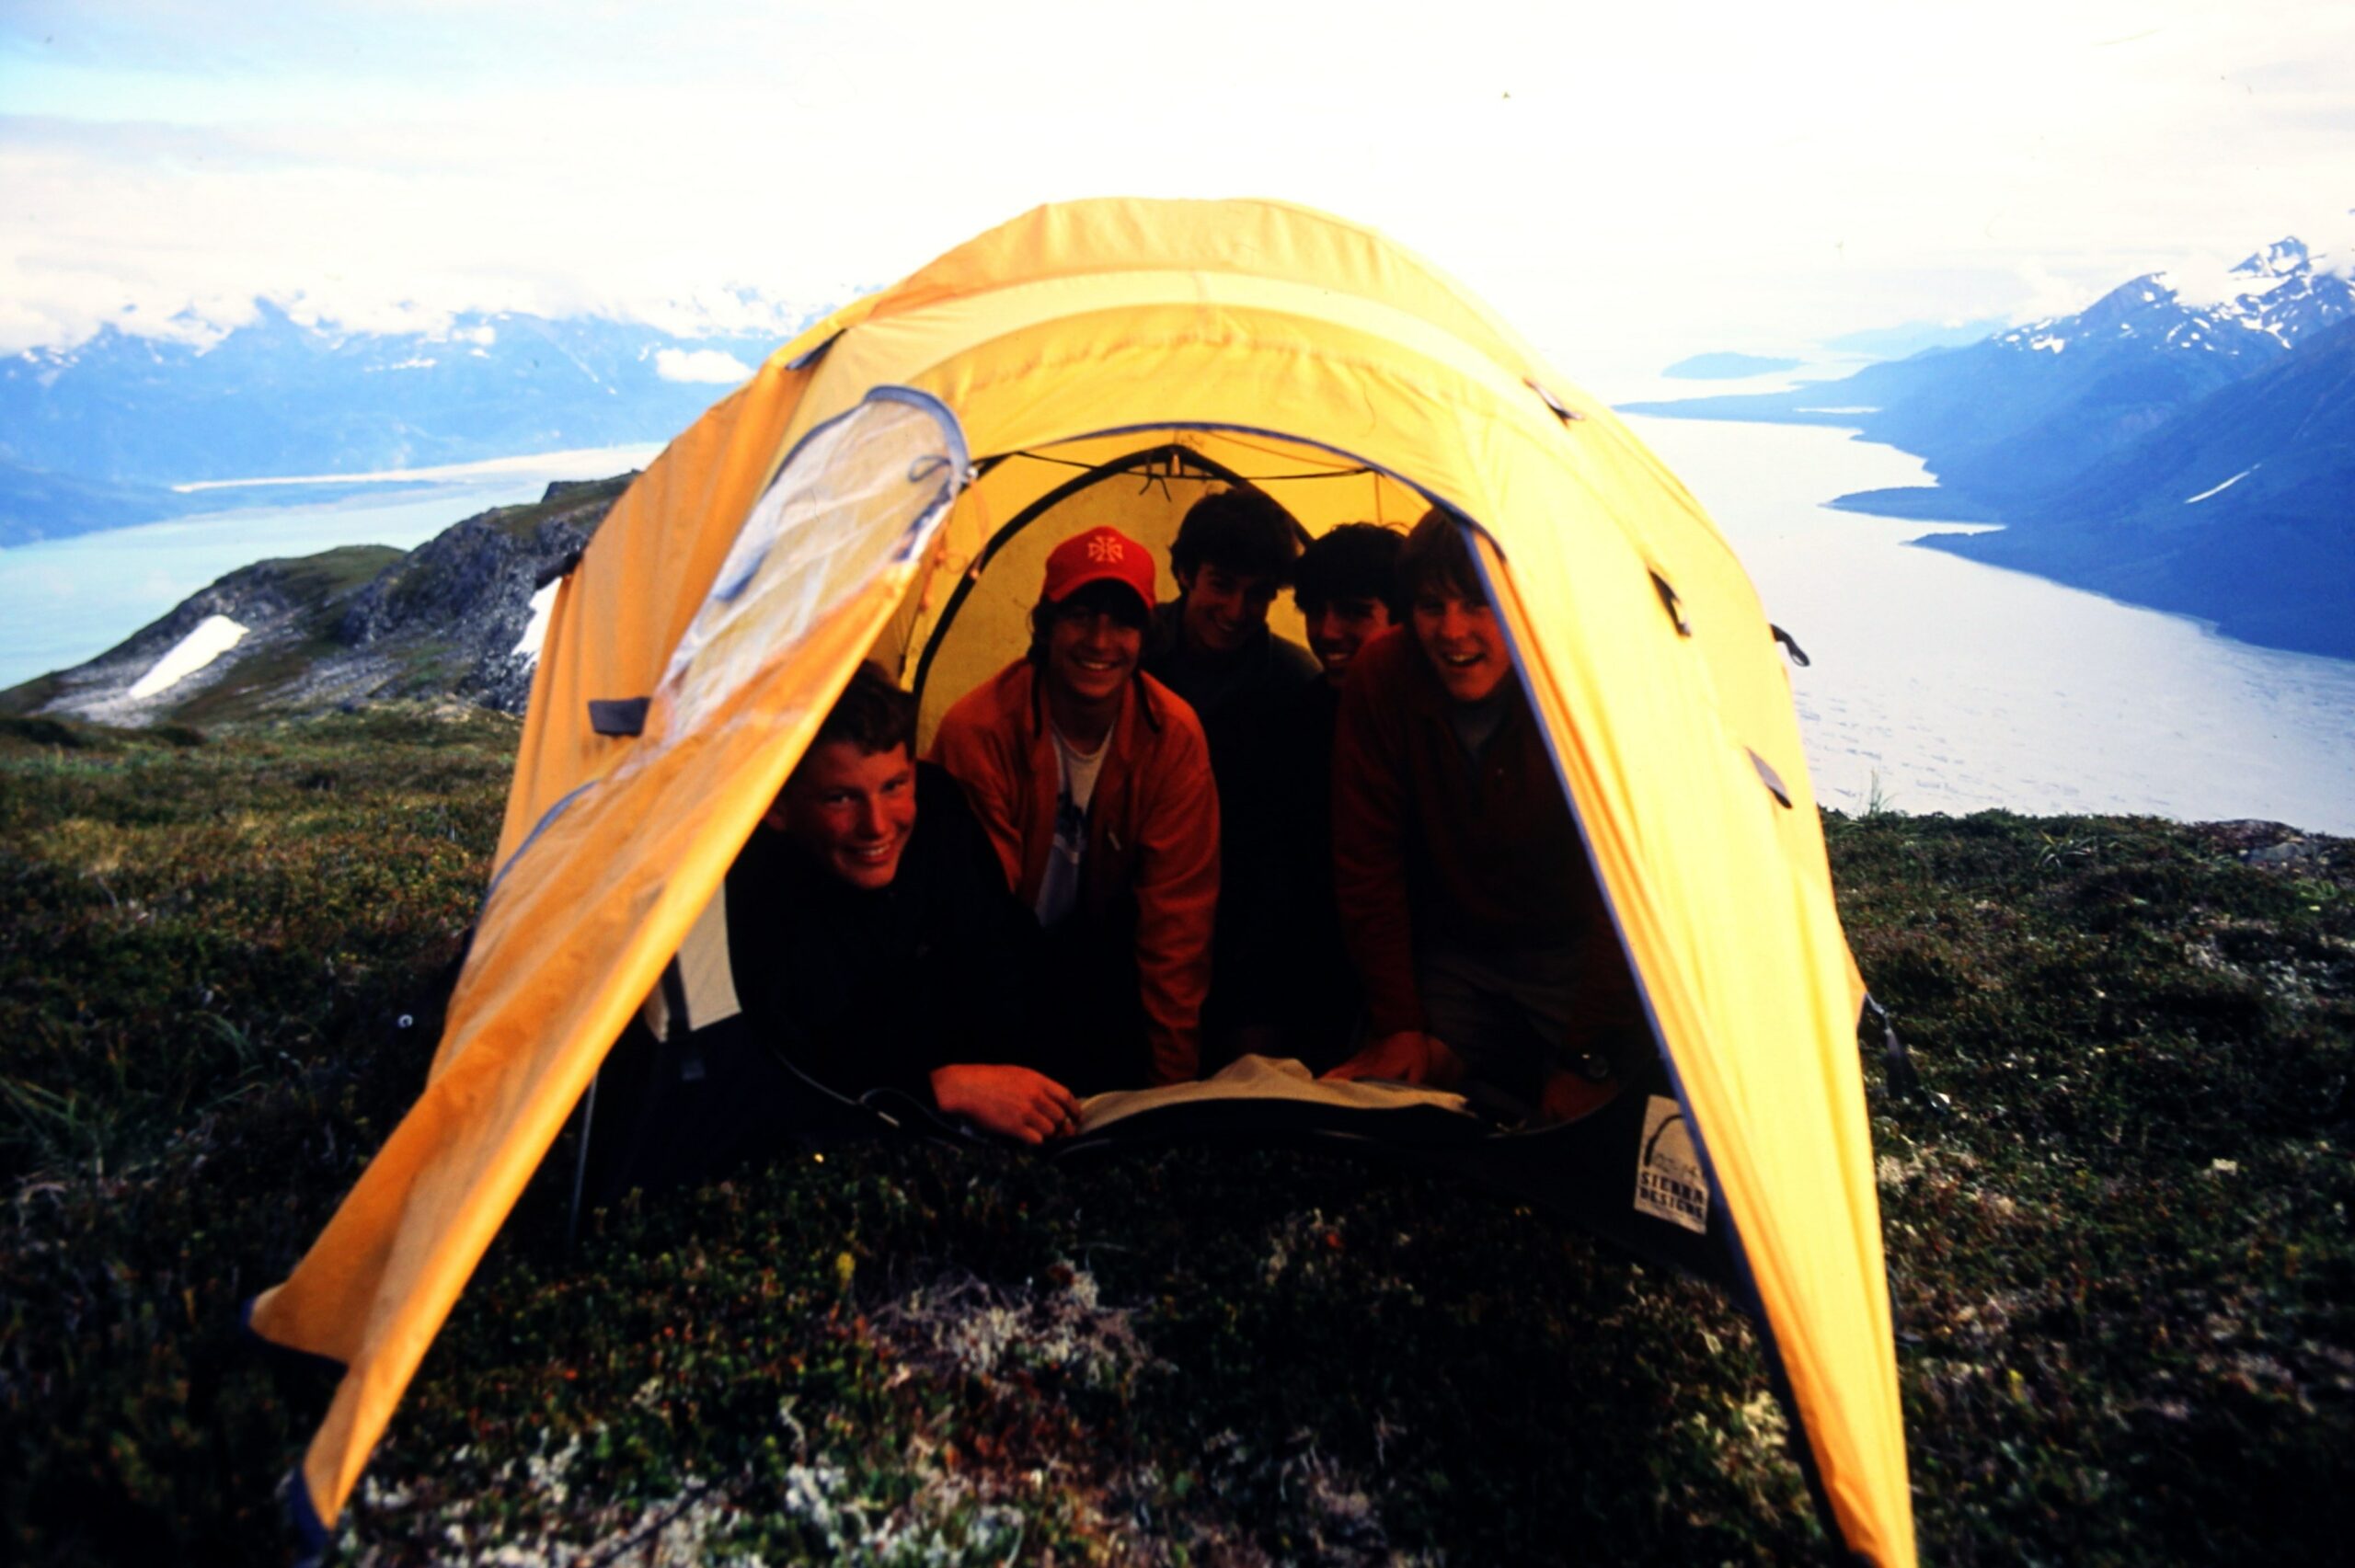 2003 Group in tent